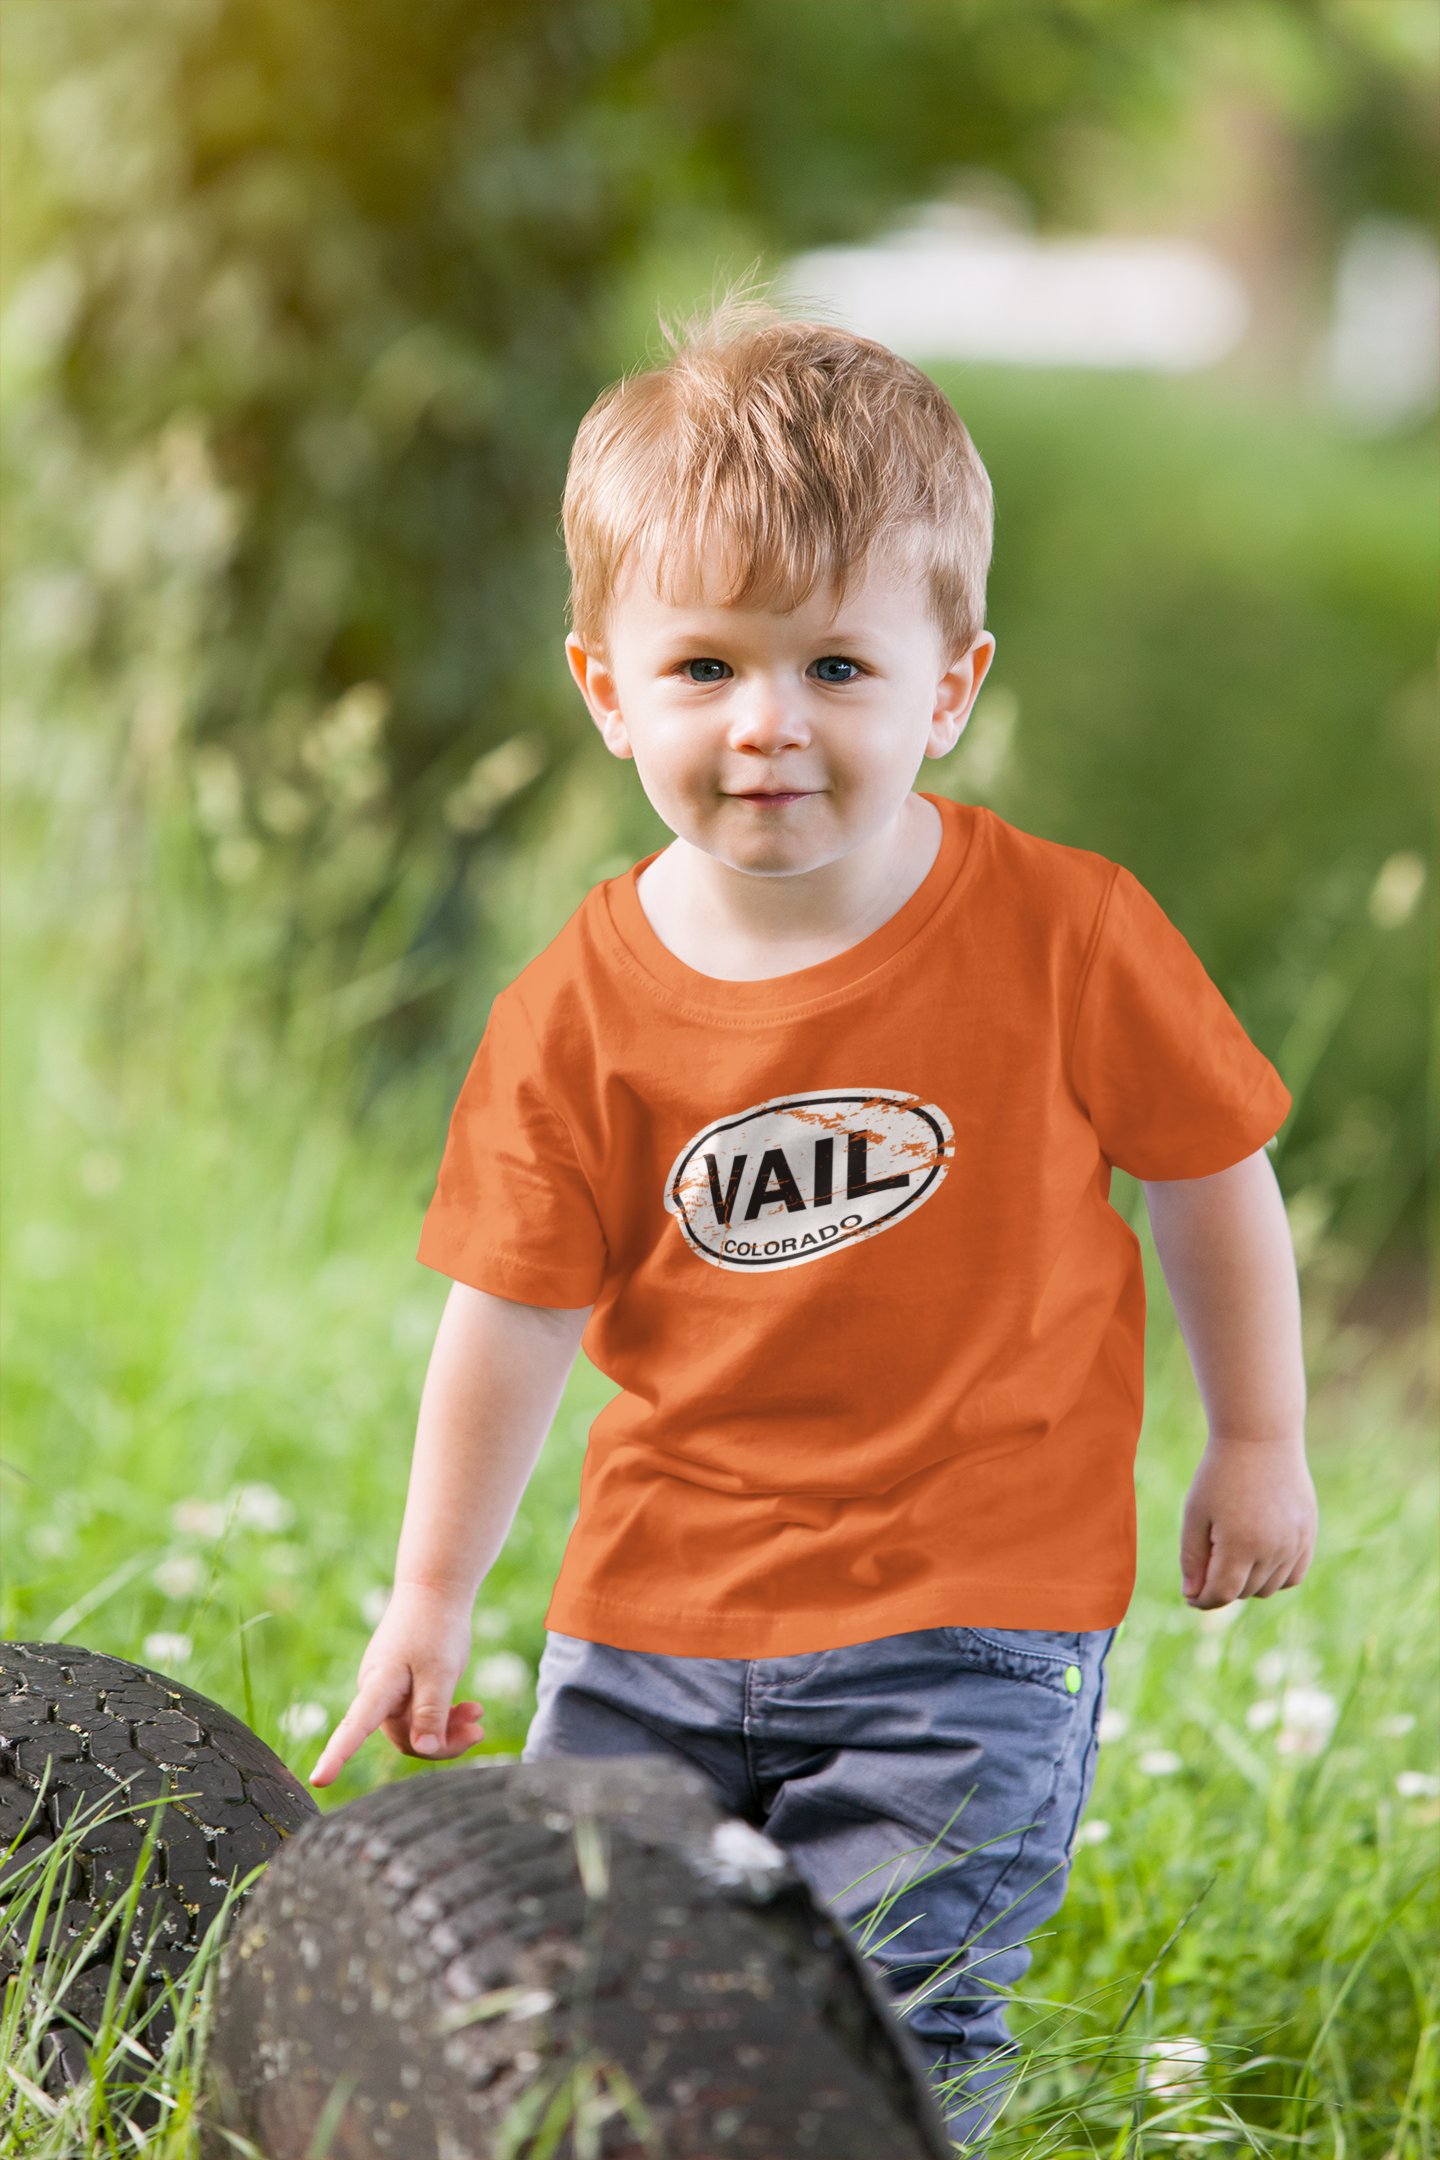 Vail, CO Classic Youth T-Shirt Gift Souvenir - My Destination Location